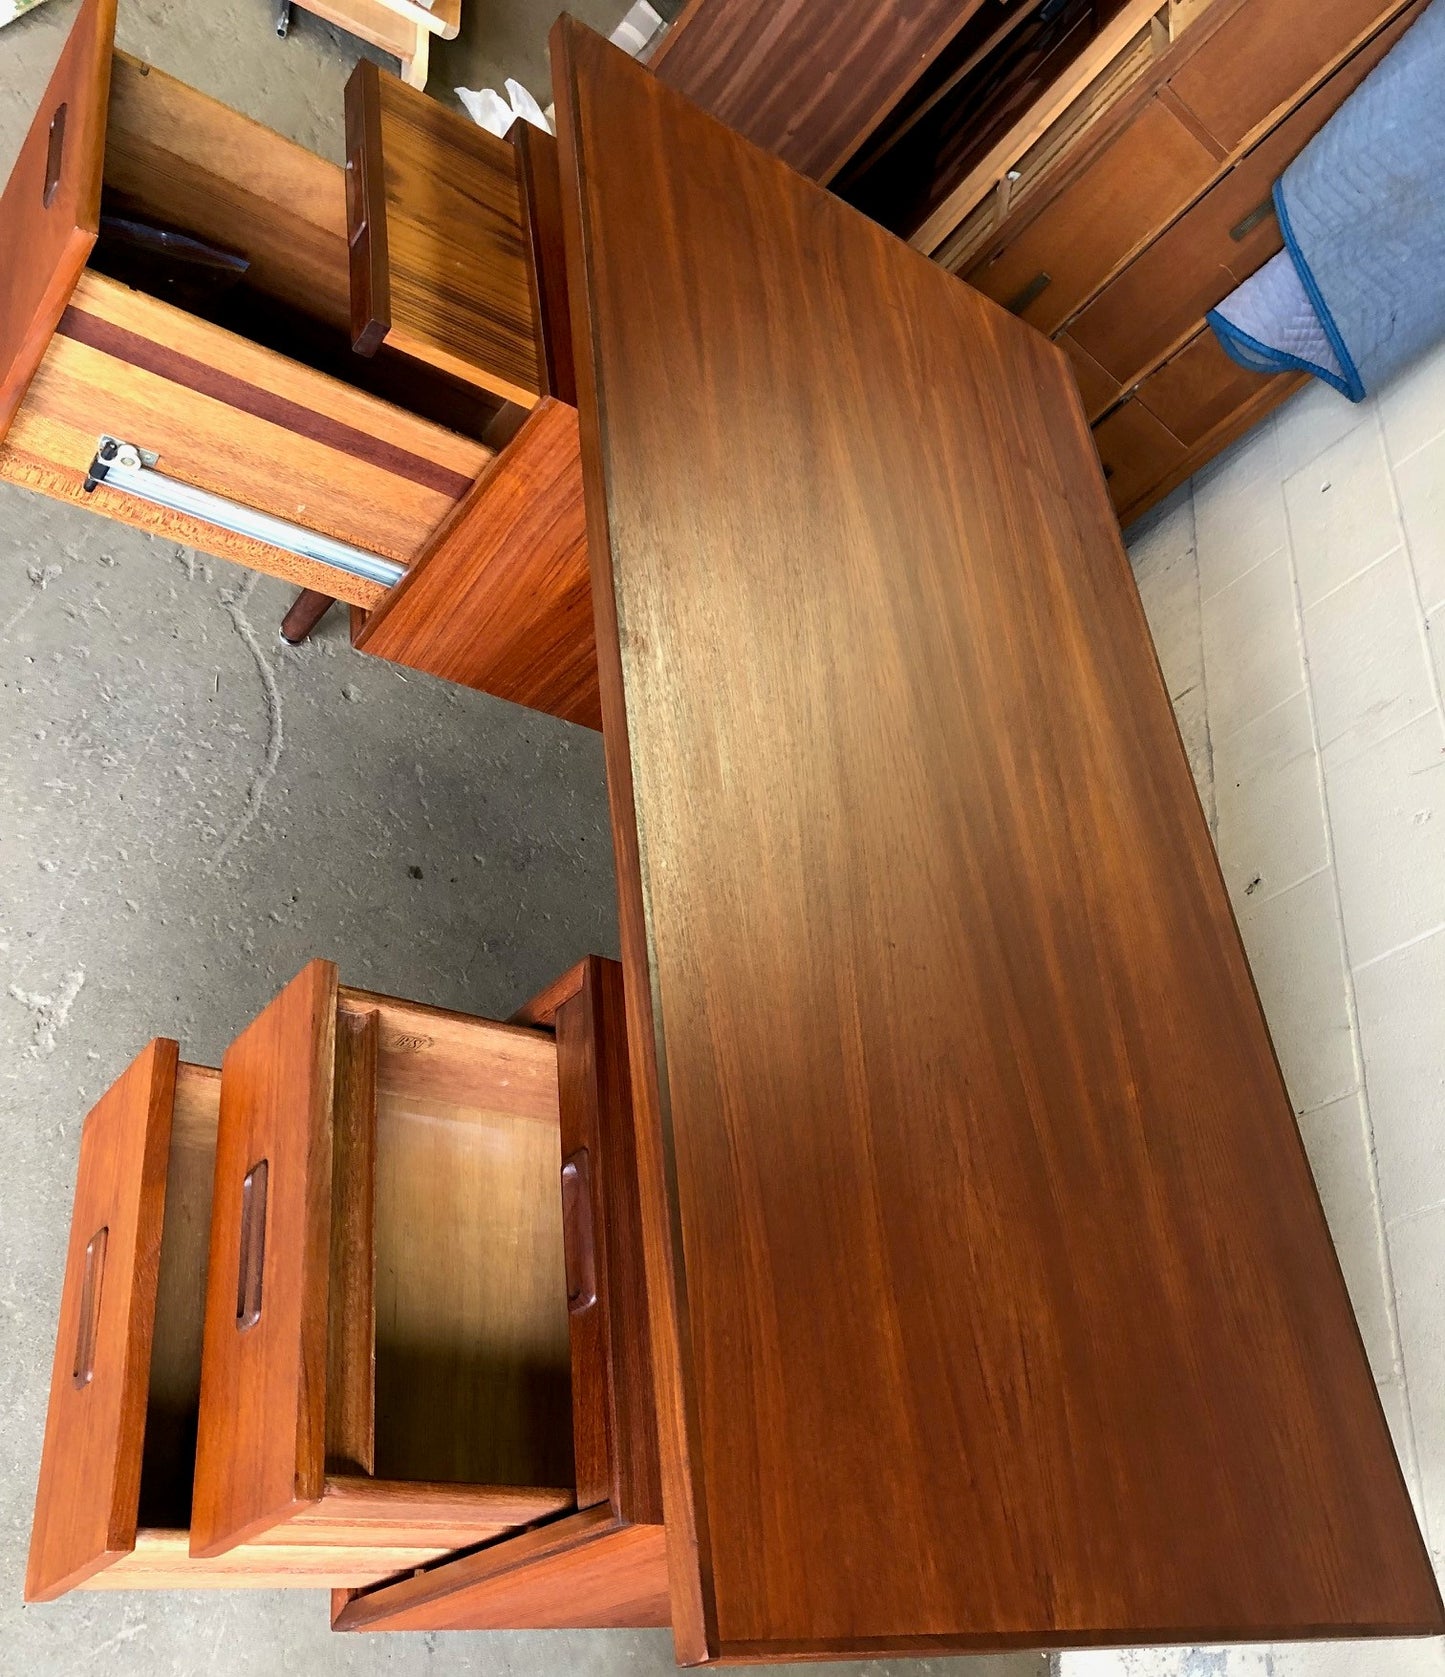 REFINISHED MCM Executive Teak Desk with Floating Top, Free Standing by RS Associates - Mid Century Modern Toronto